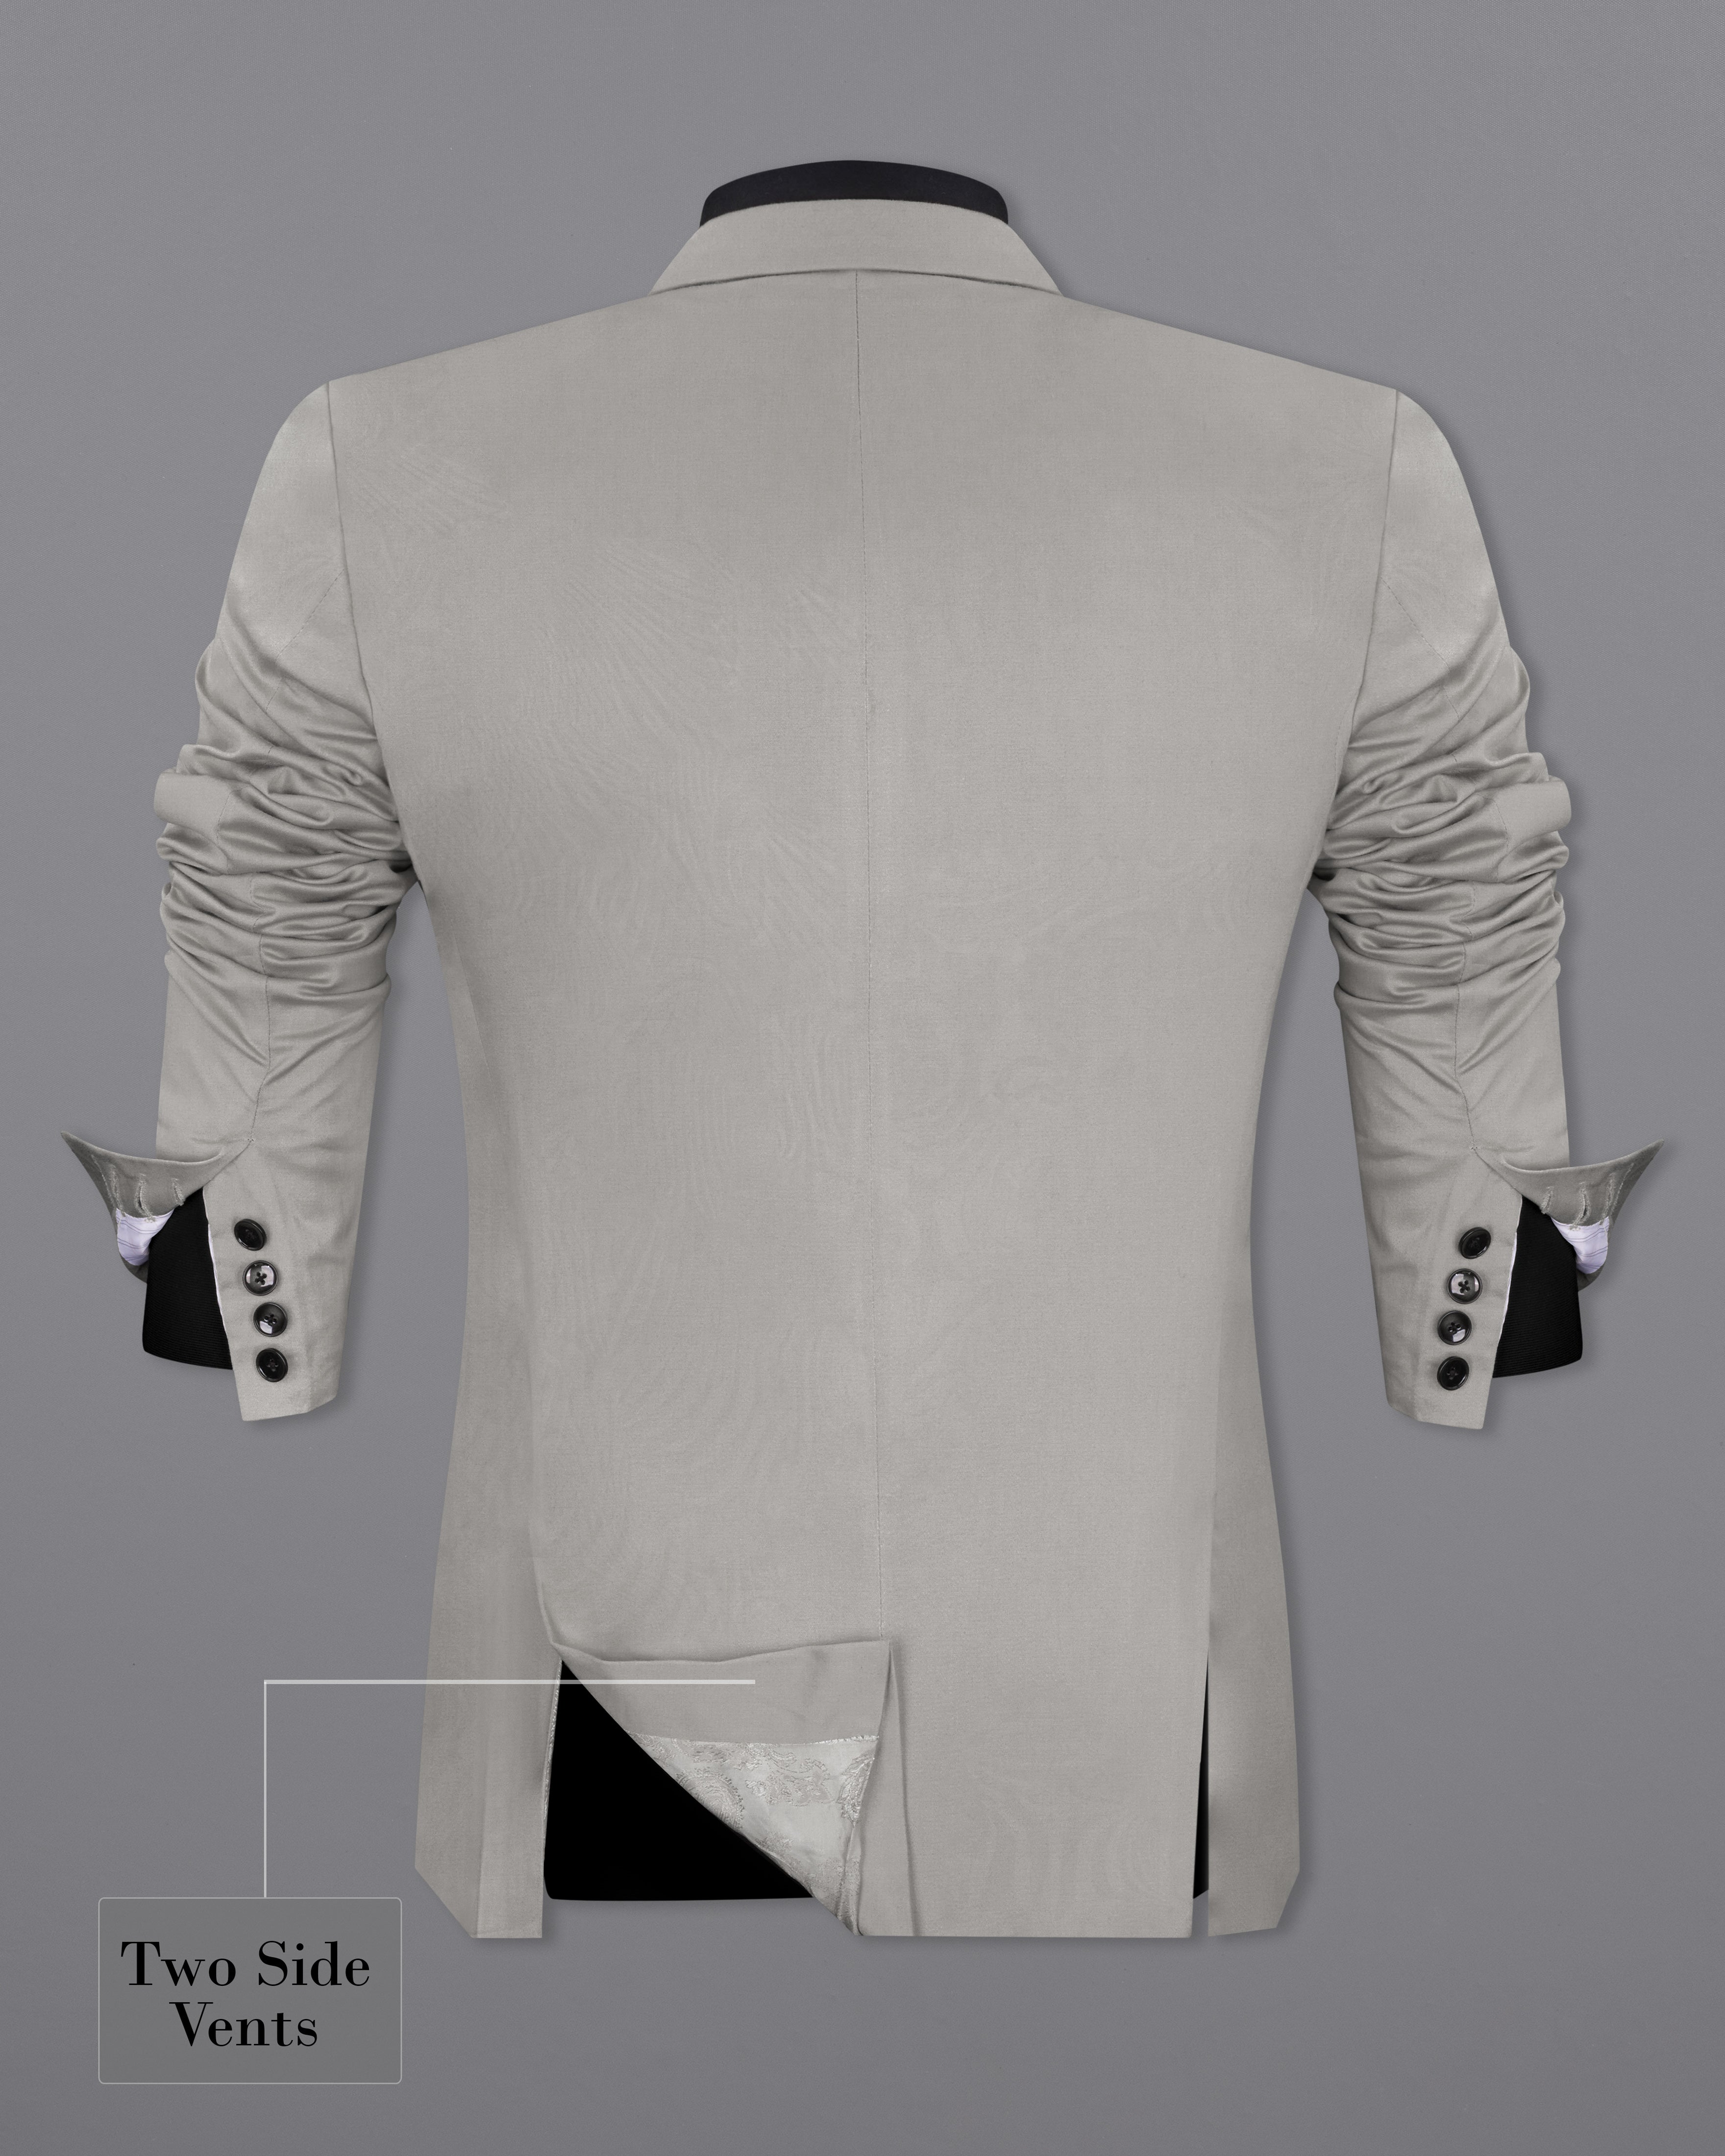 Martini Gray Stretchable Double Breasted Premium Cotton traveler Suit ST2668-DB-36,ST2668-DB-38,ST2668-DB-40,ST2668-DB-42,ST2668-DB-44,ST2668-DB-46,ST2668-DB-48,ST2668-DB-50,ST2668-DB-52,ST2668-DB-54,ST2668-DB-56,ST2668-DB-58,ST2668-DB-60